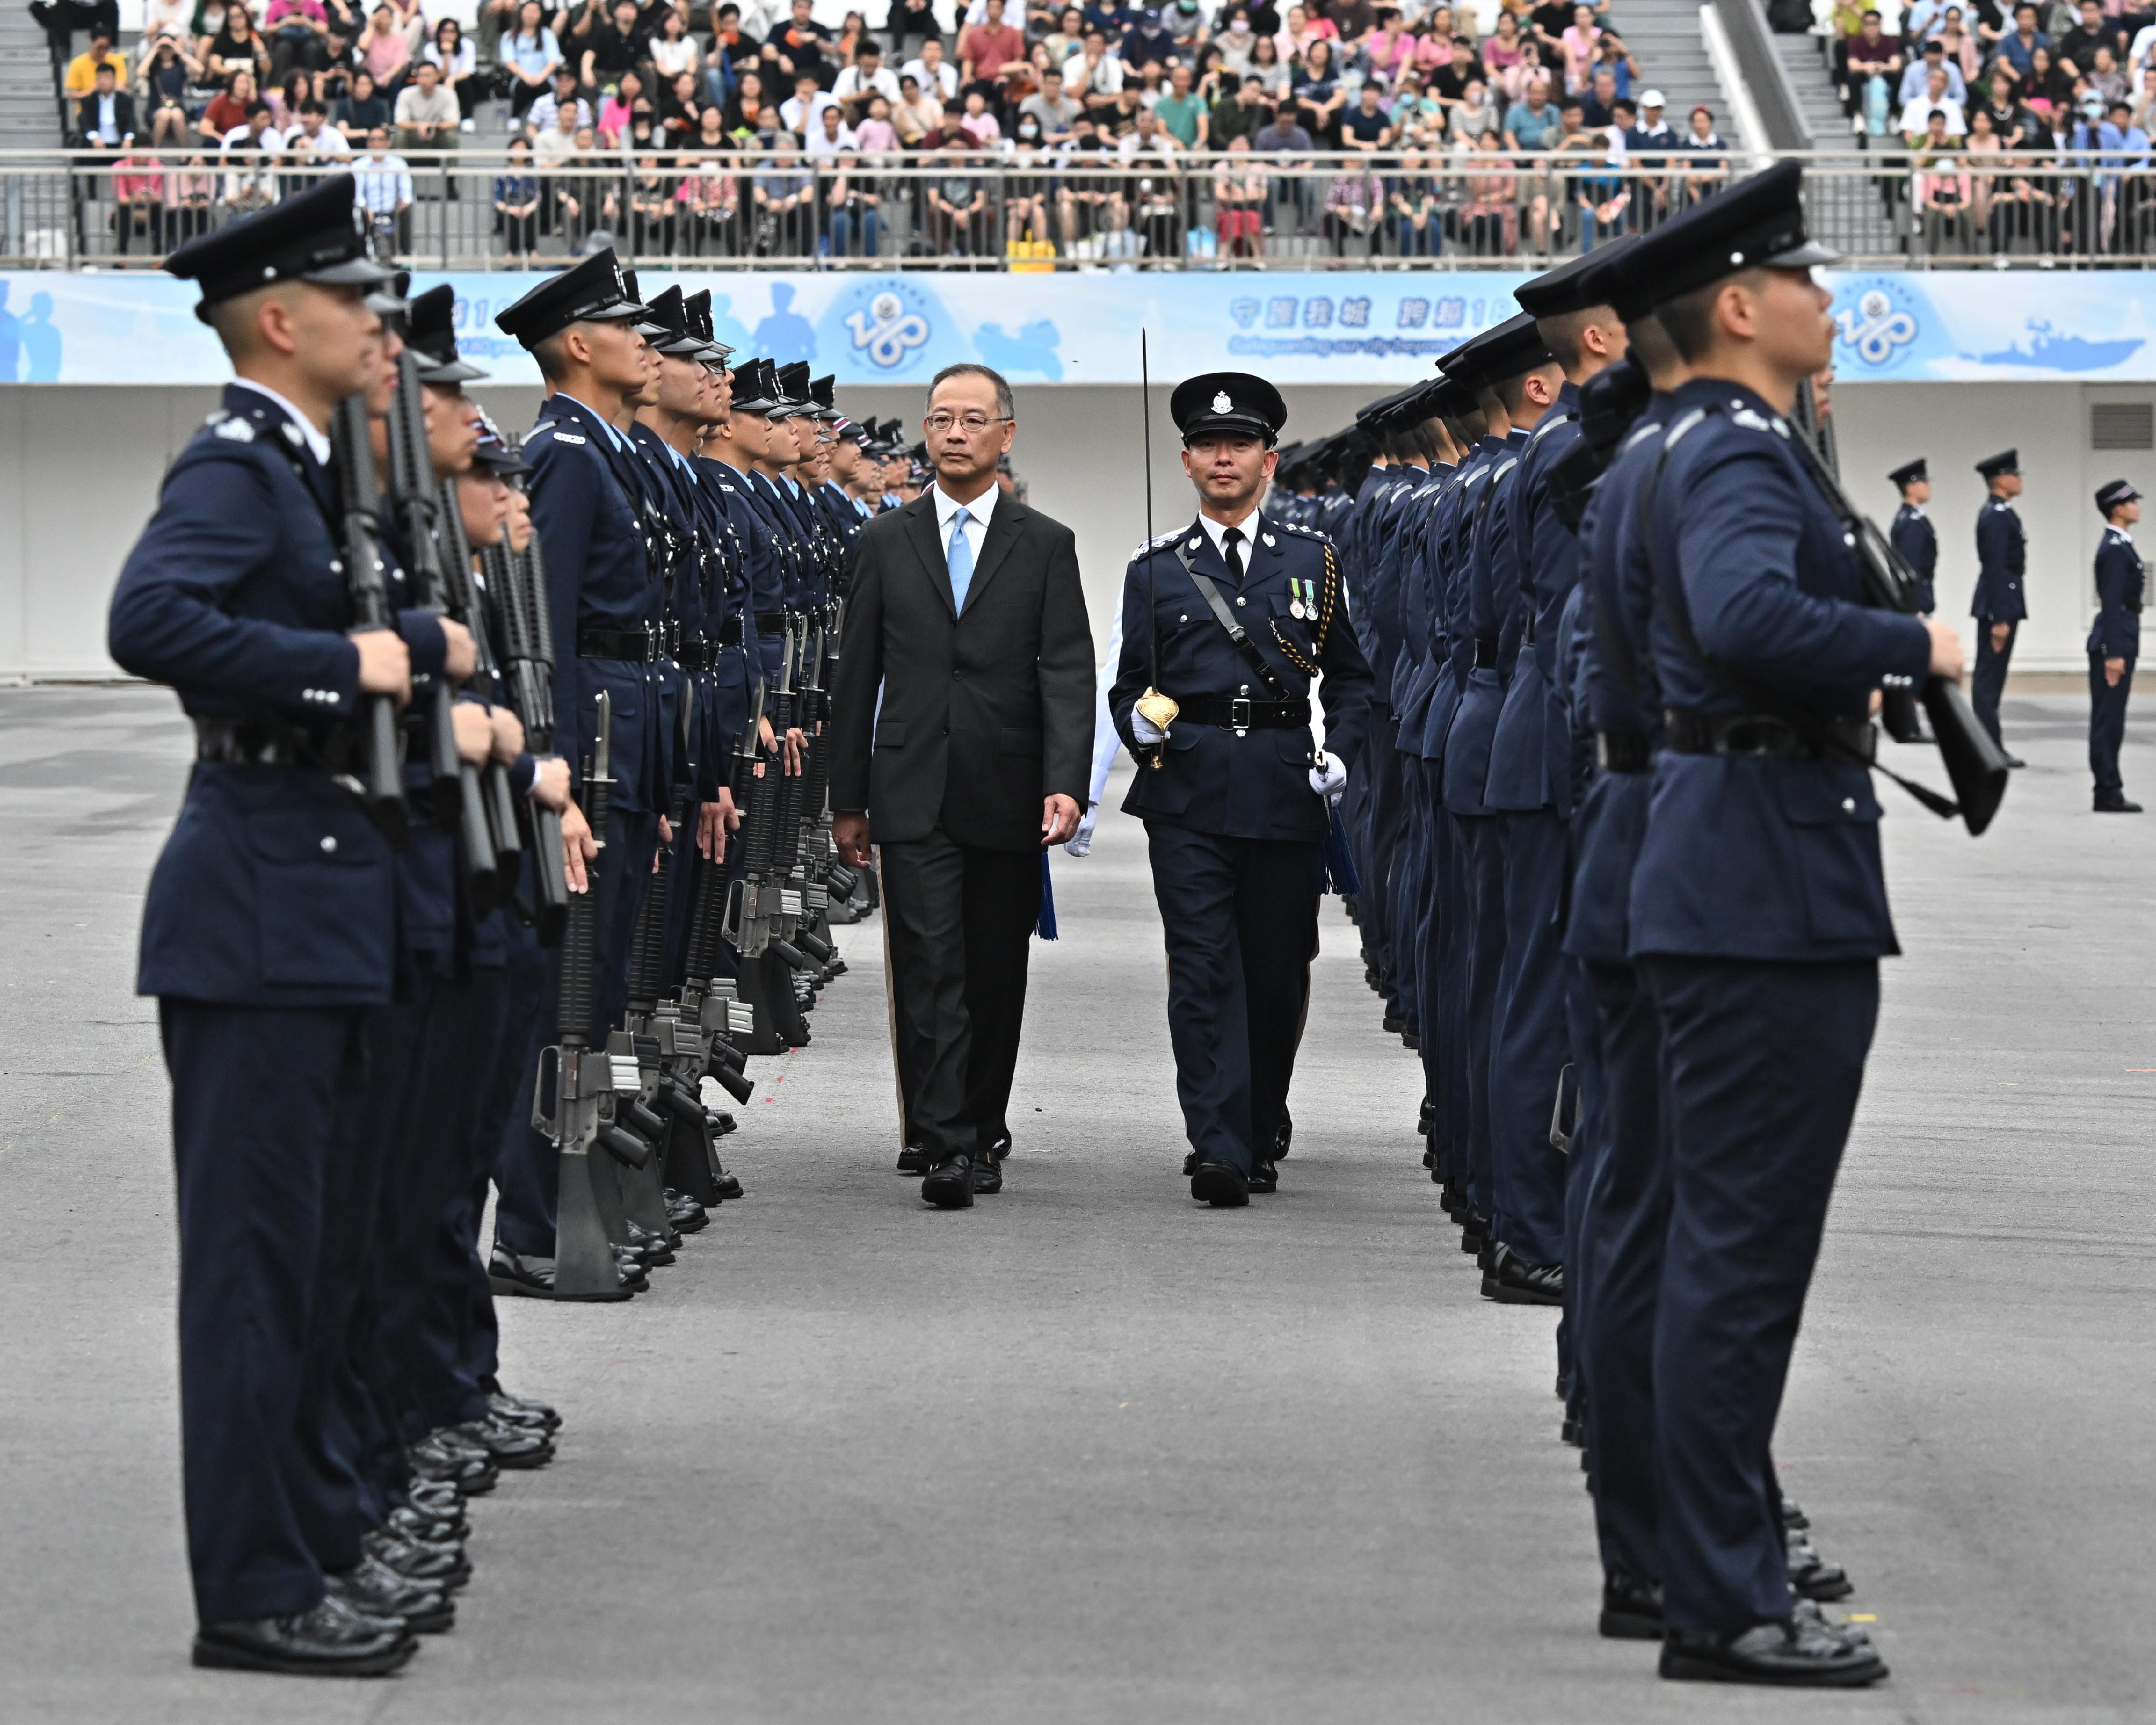 The Chief Executive of the Hong Kong Monetary Authority, Mr Eddie Yue Wai-man, inspects a passing-out parade as a reviewing officer at the Hong Kong Police College today (April 27).